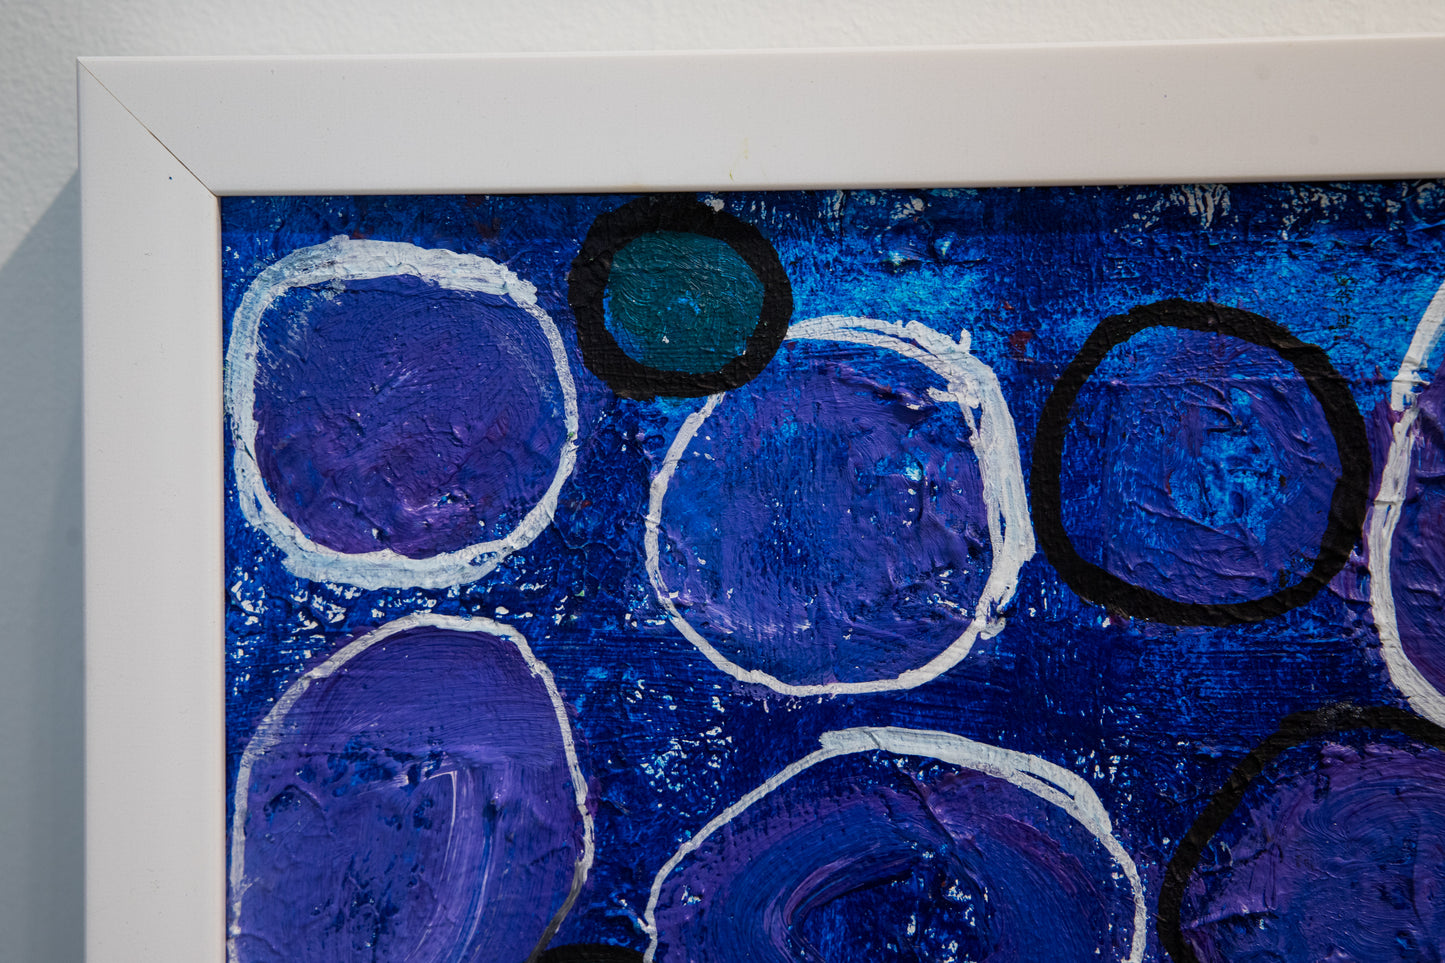 Circles (Blue and Purple) (Framed)